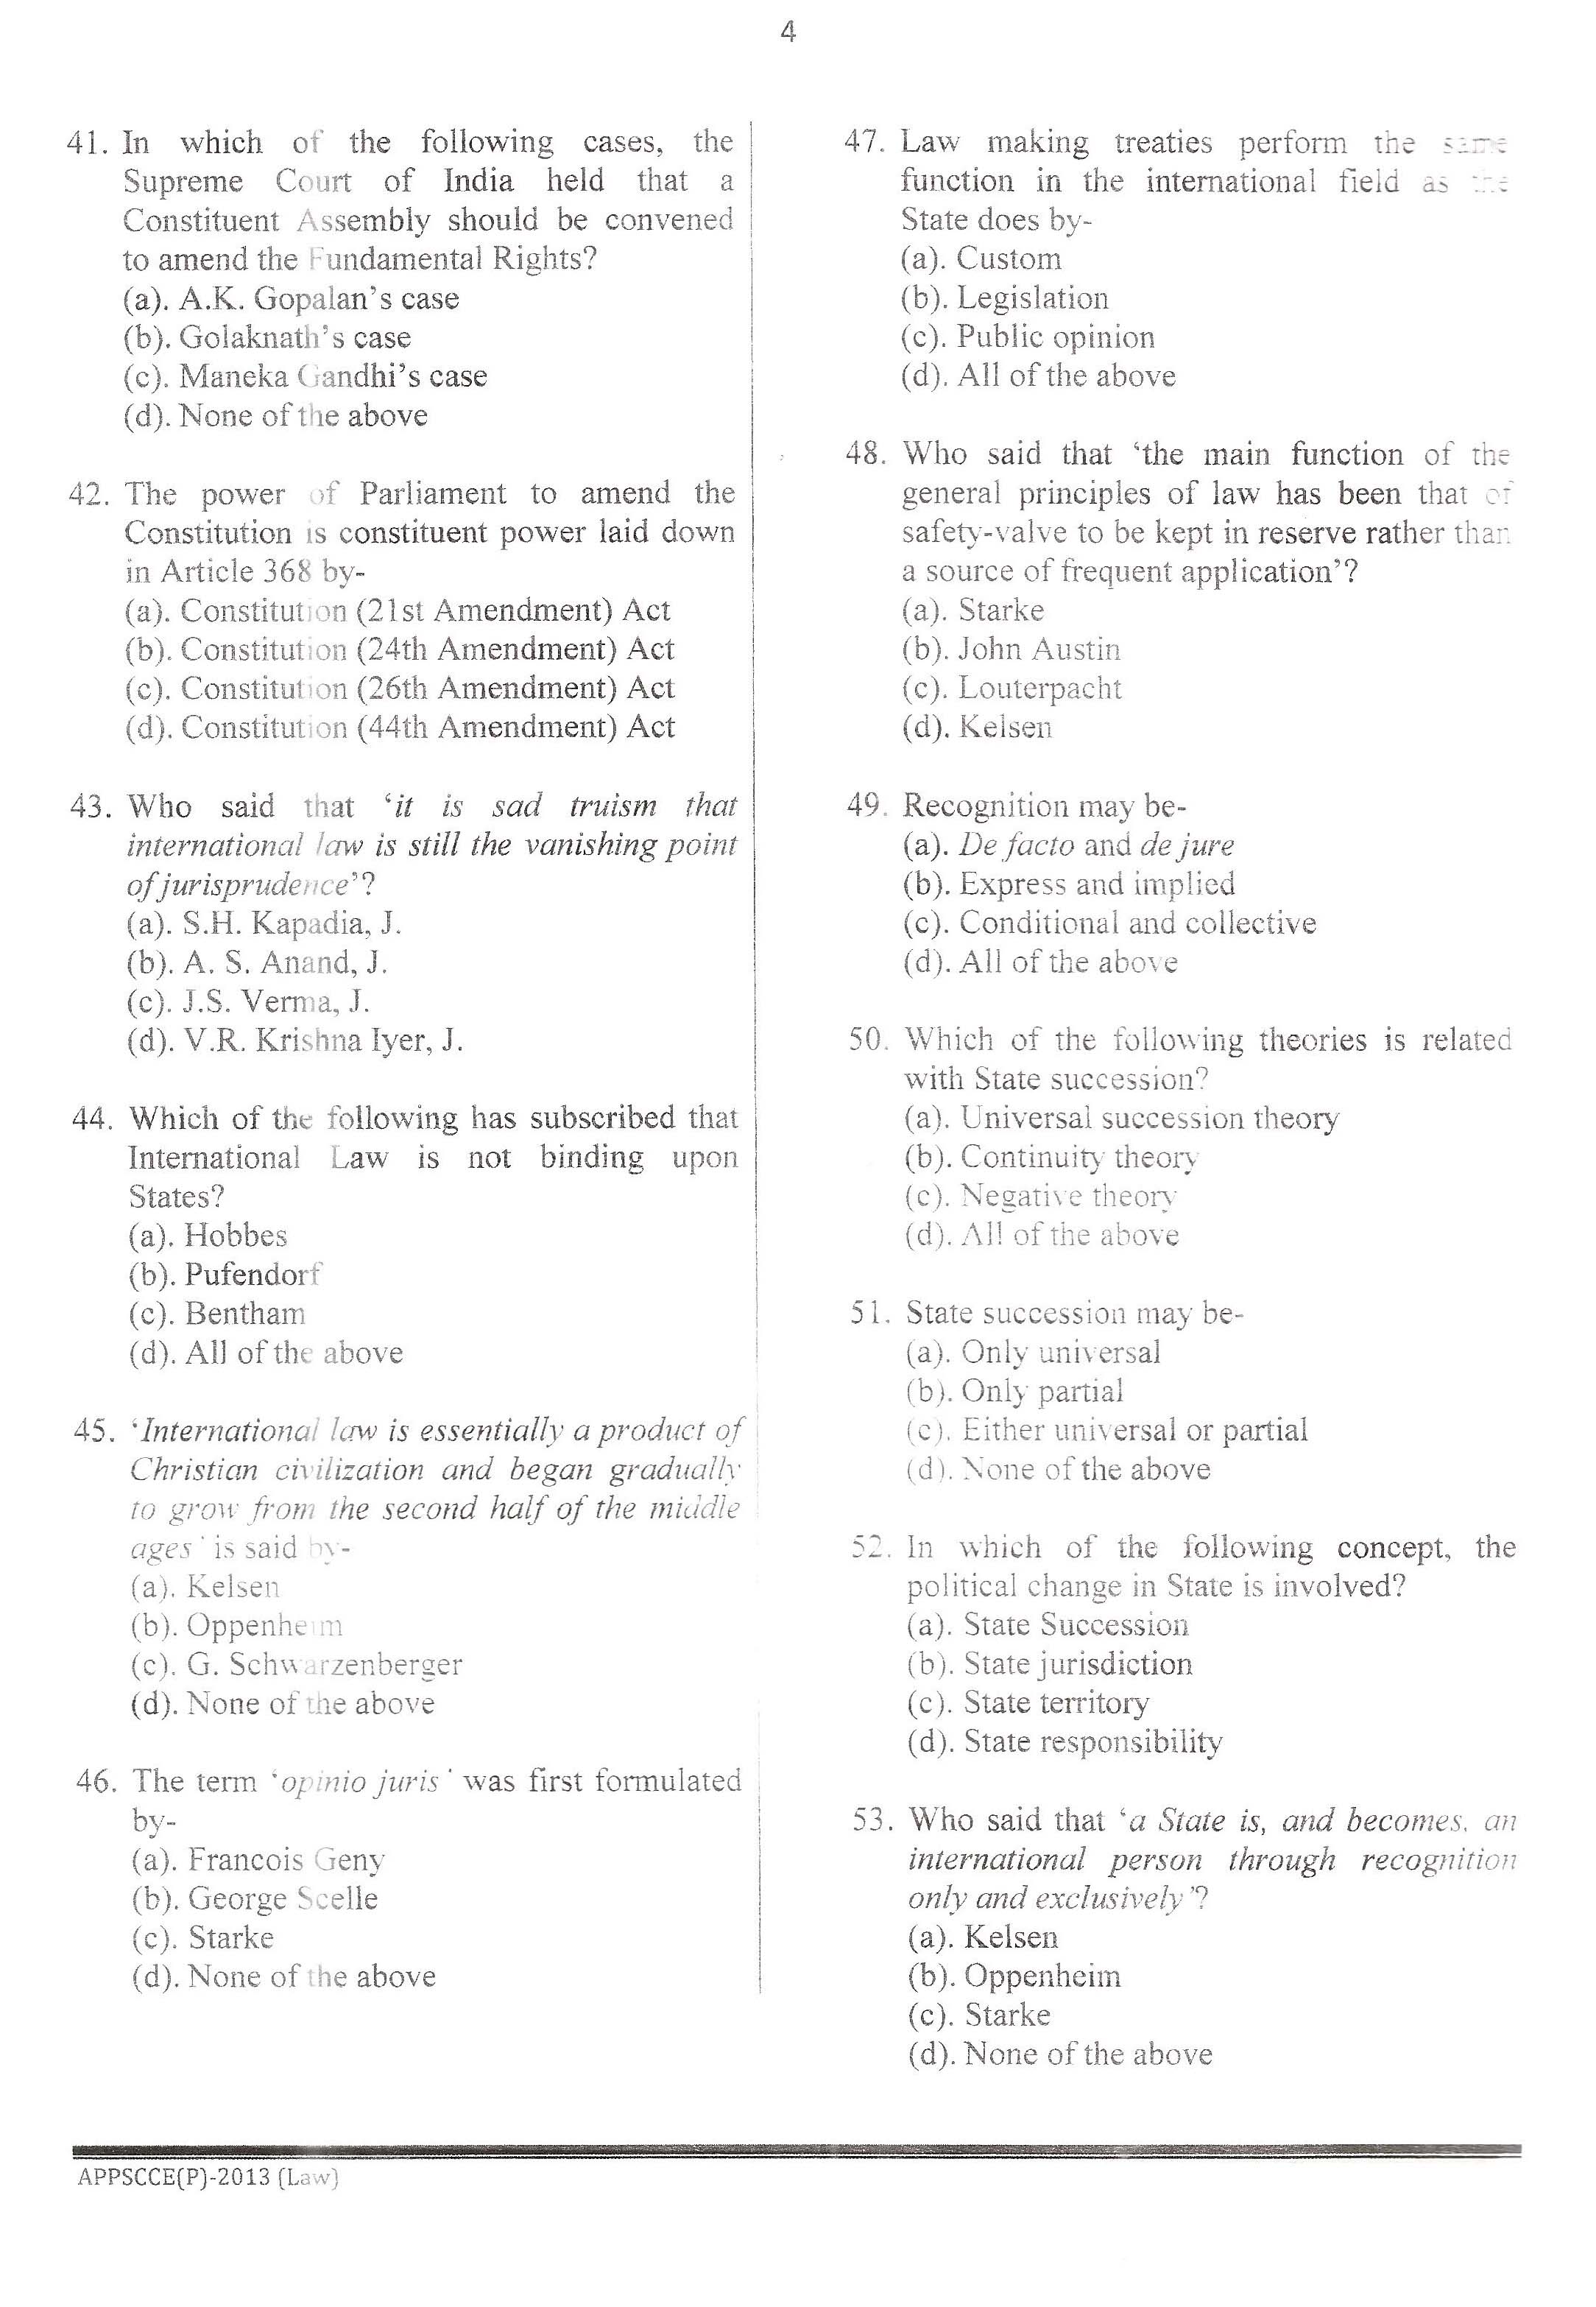 APPSC Combined Competitive Prelims Exam 2013 Law 5